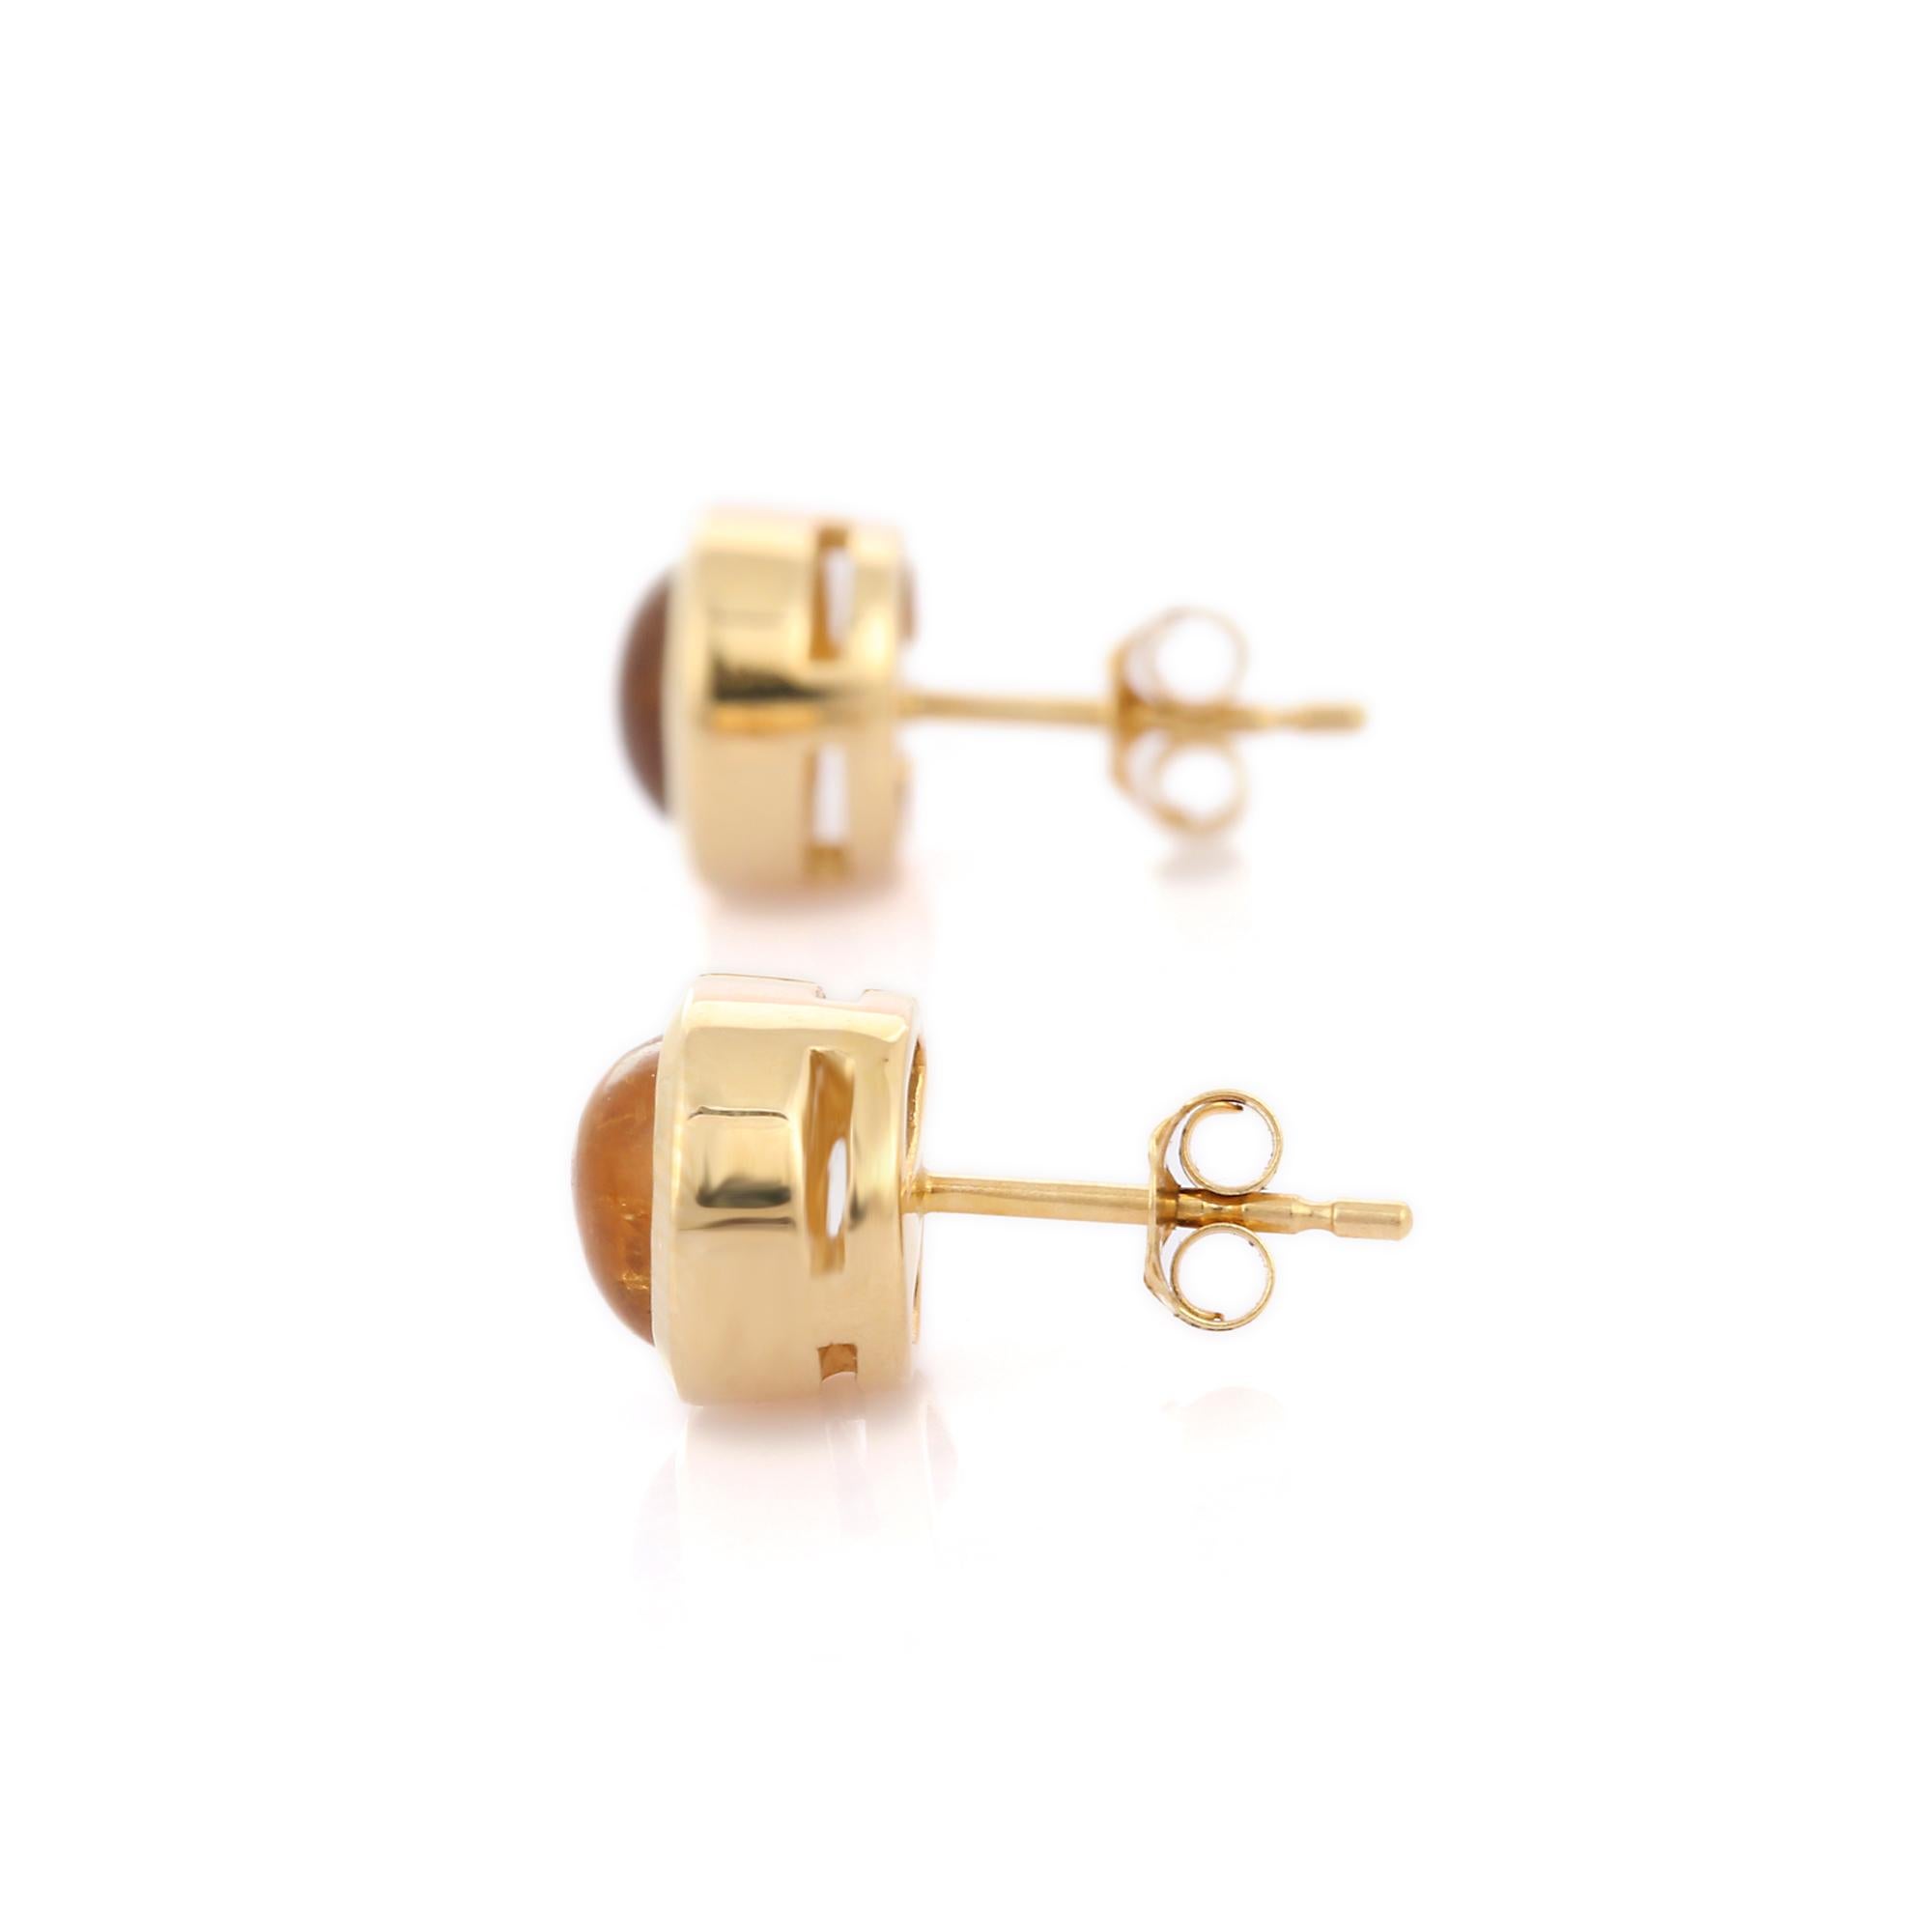 Round Cut Natural Citrine Gemstone Ringed in 14 Karat Yellow Gold Dainty Stud Earrings For Sale